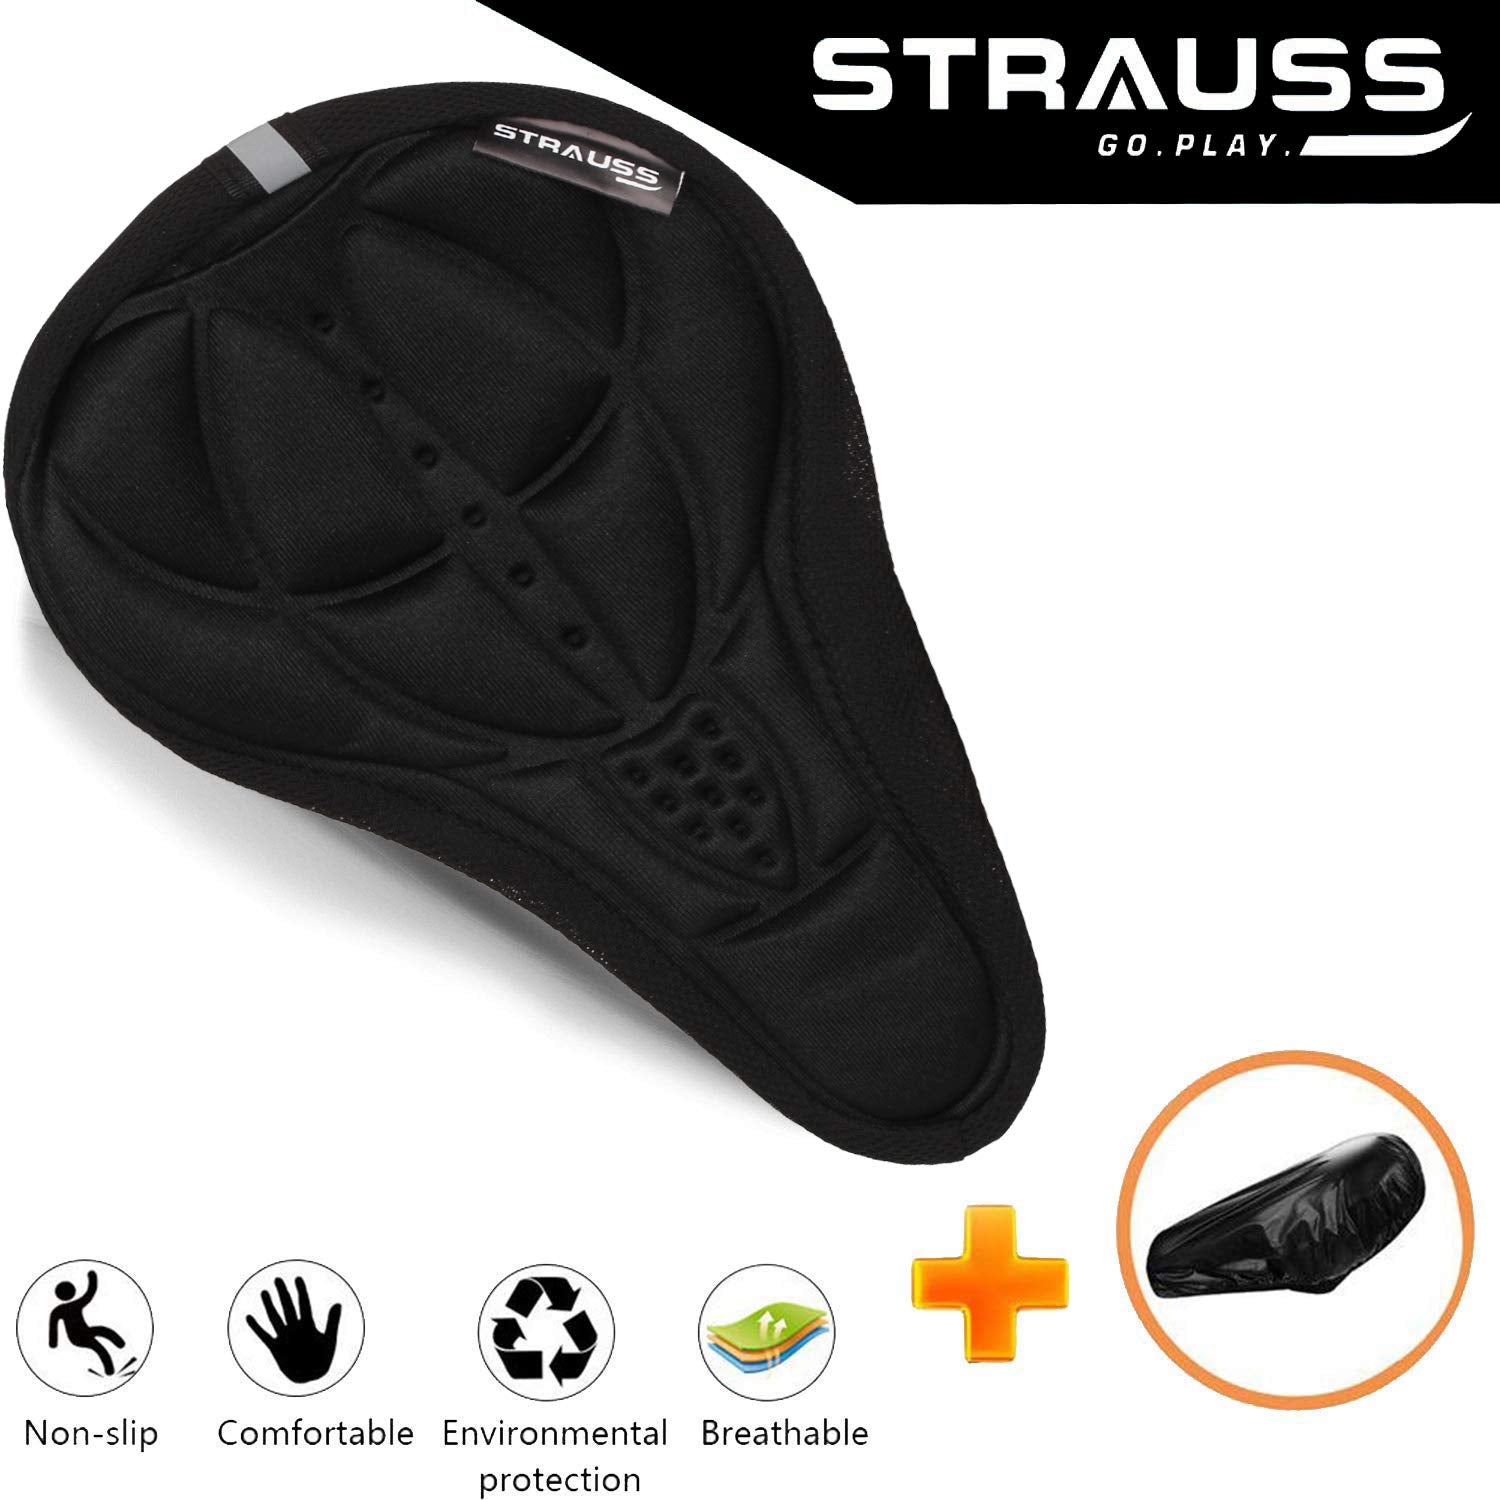 Strauss Bicycle Sponge & Gel Saddle Seat Covers, Cycle Seat Cushion, (Multicolor) 3D Sponge, Black